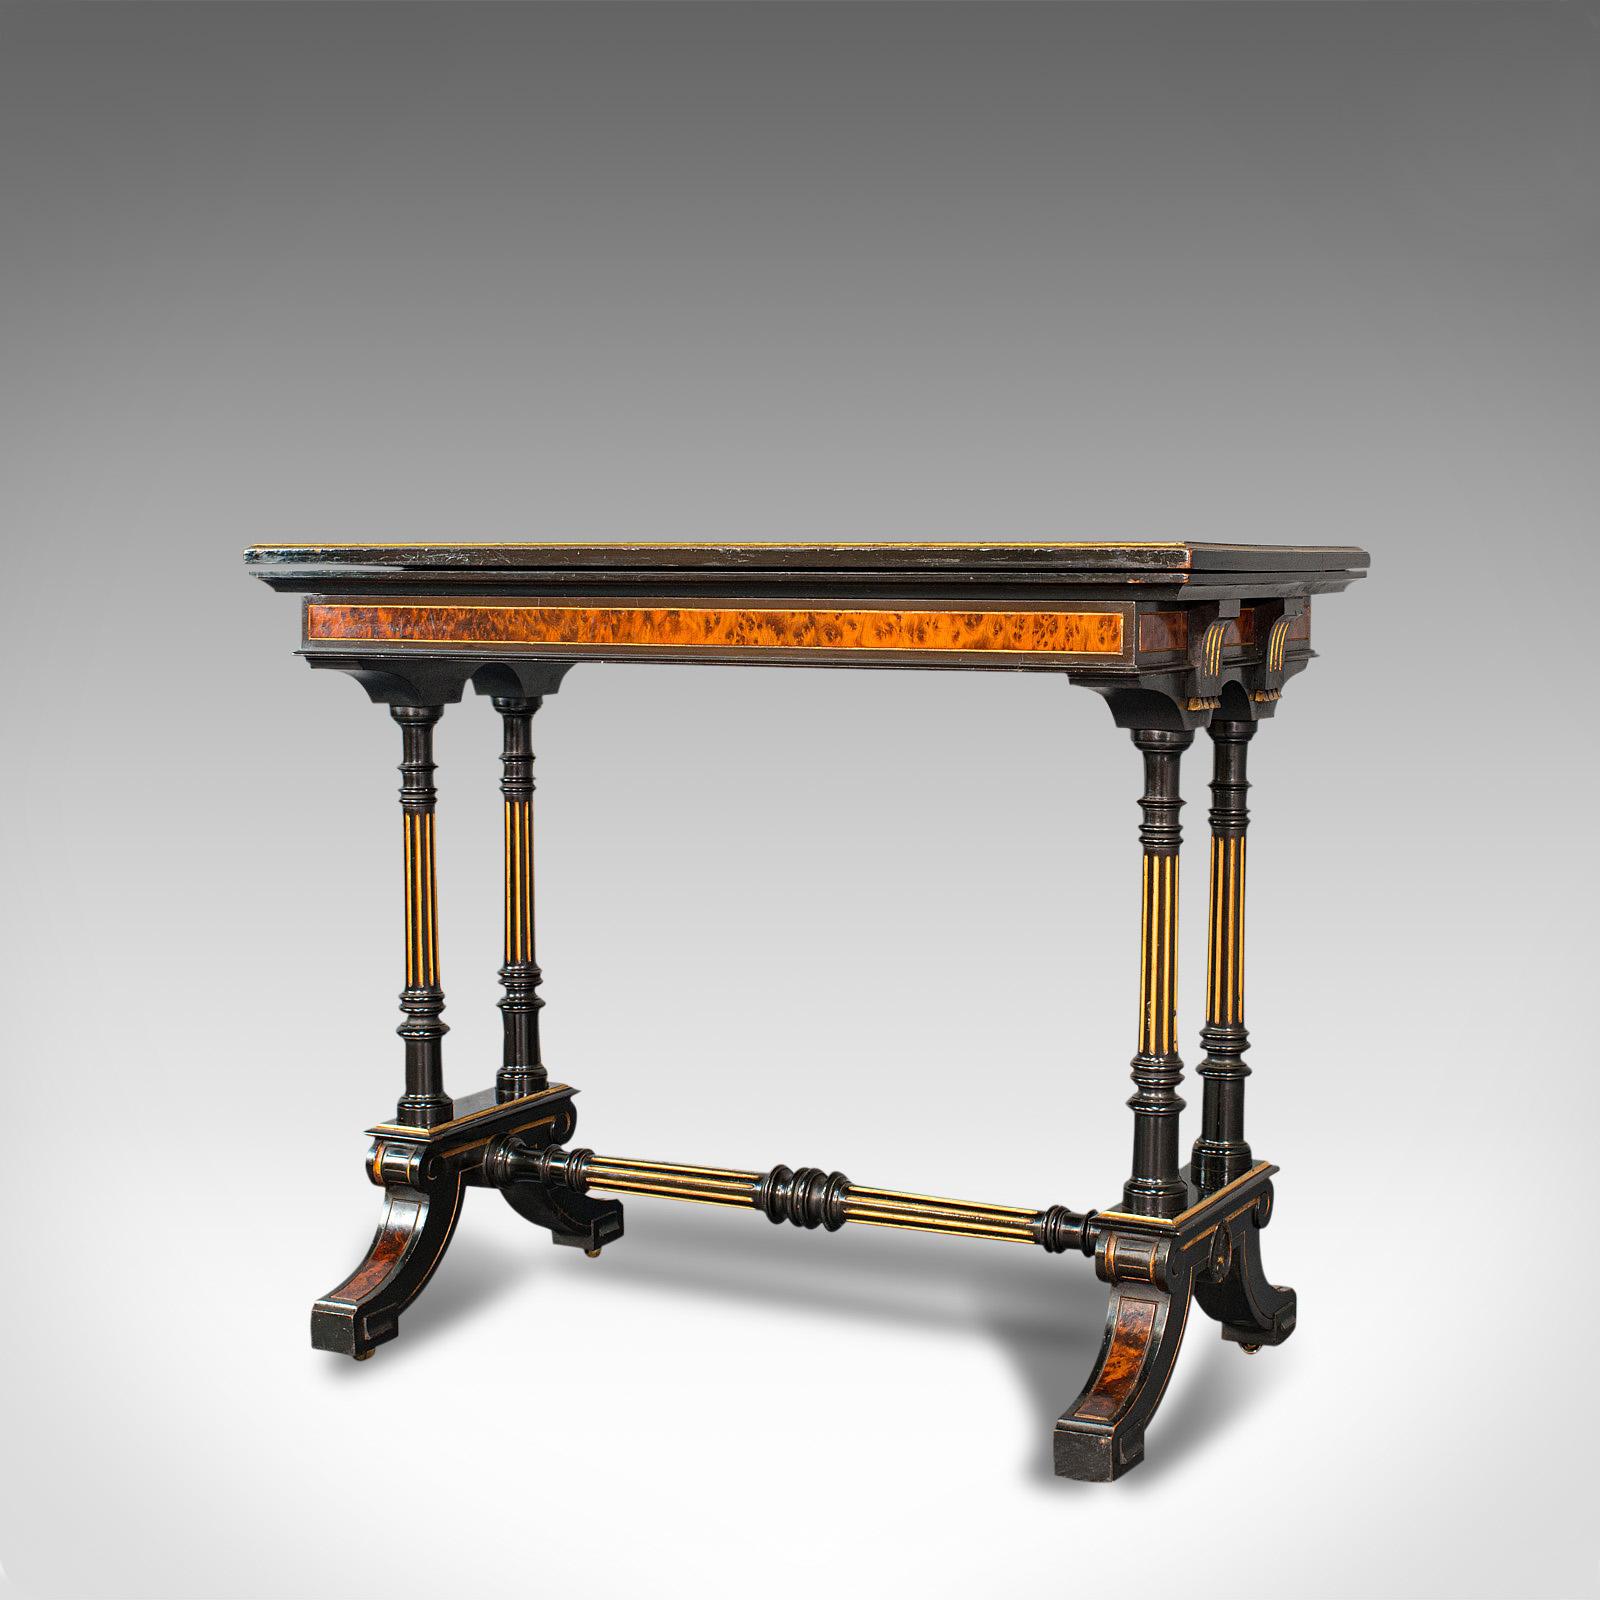 British Antique Card Table, Ebonised, Games, Gillow & Co, Aesthetic Period, Circa 1875